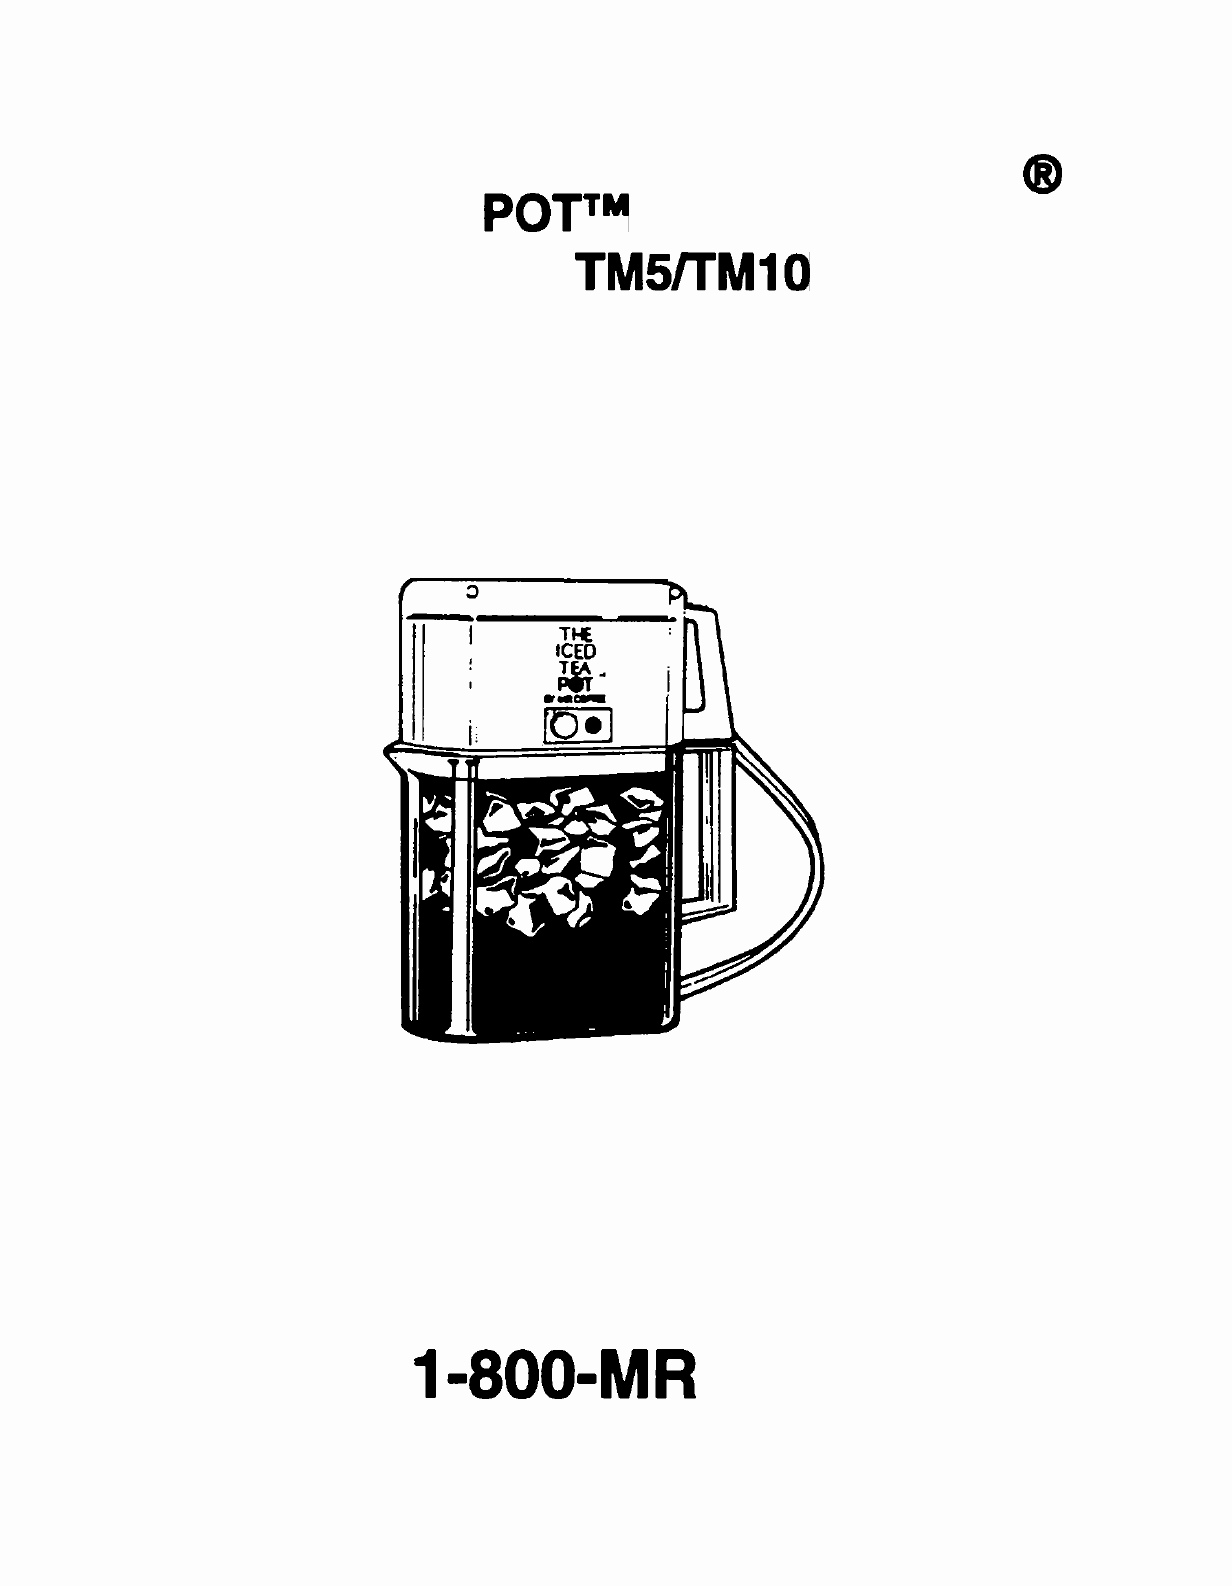 User manual Mr. Coffee Iced Tea Maker (English - 7 pages)